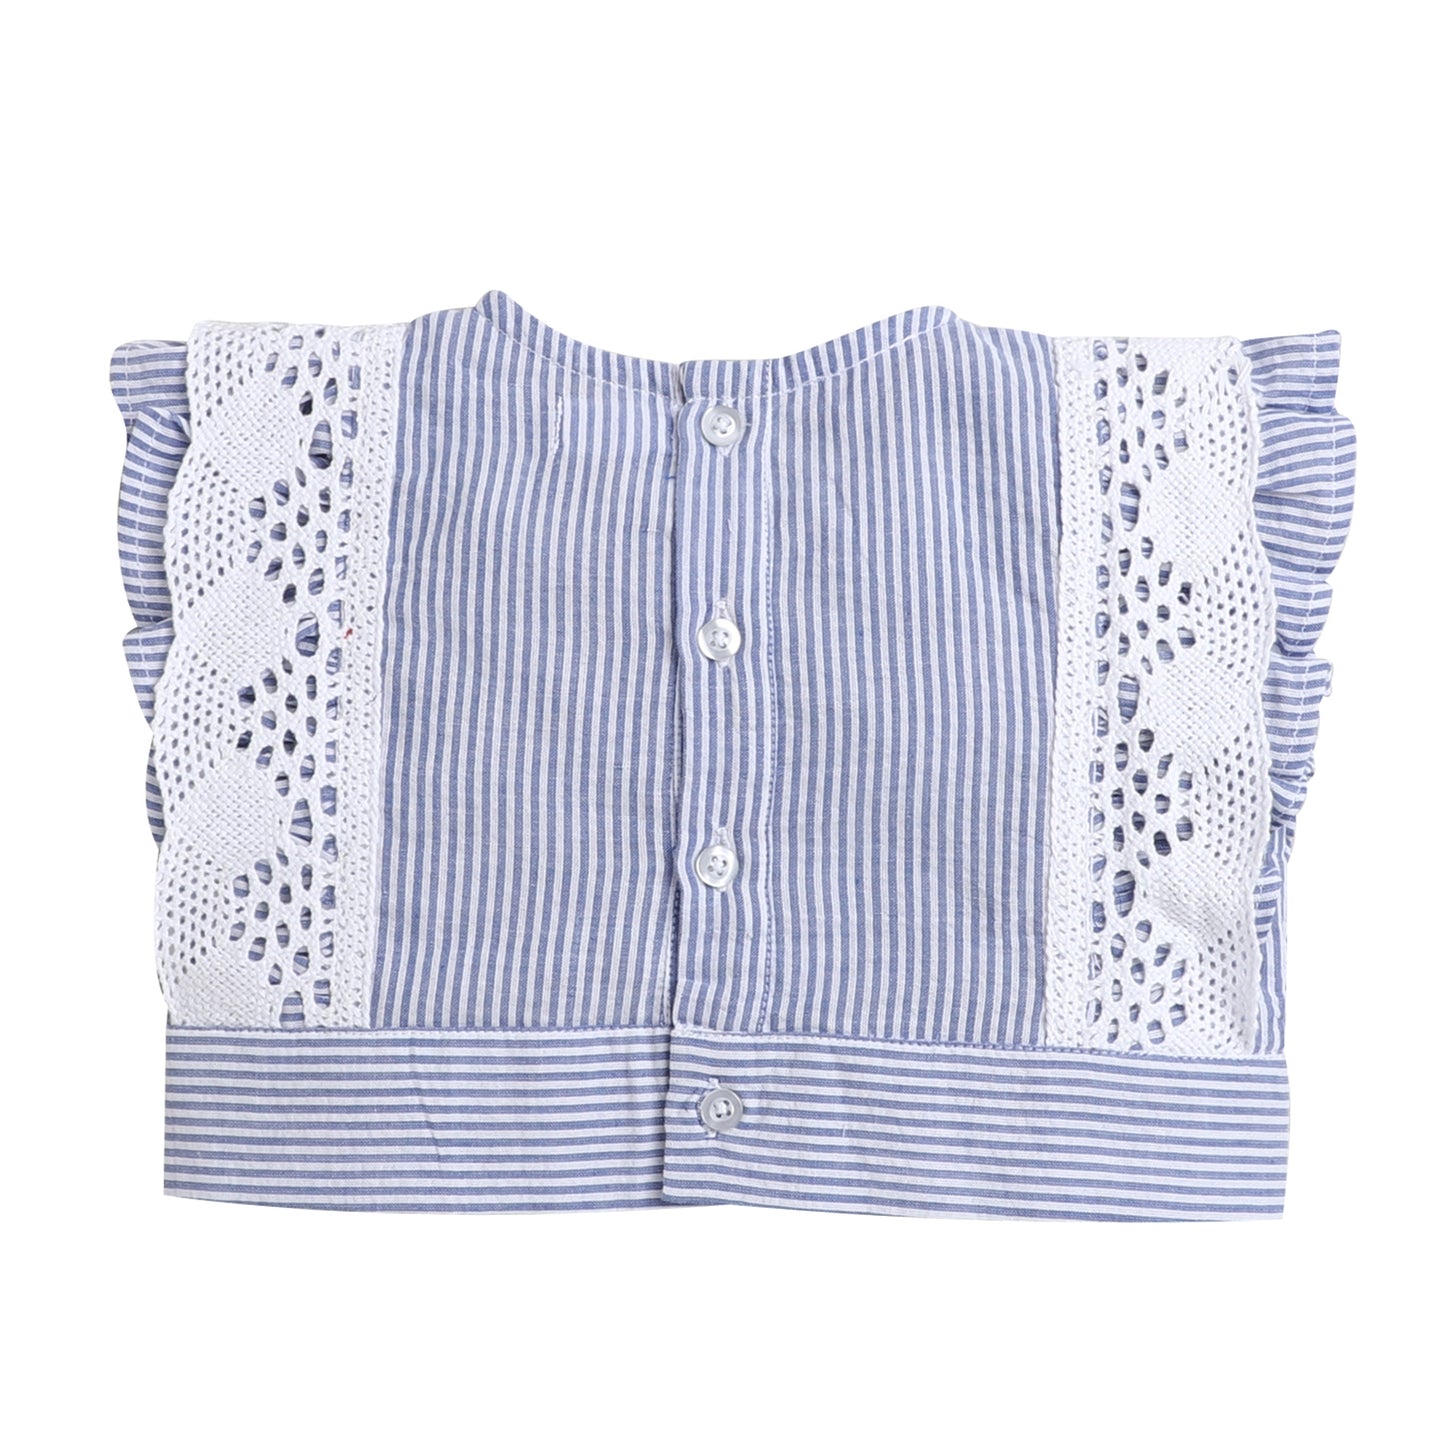 Knitting Doodles Coord Set- Crop Top With Lace And Paper Bag Pants- Blue/white